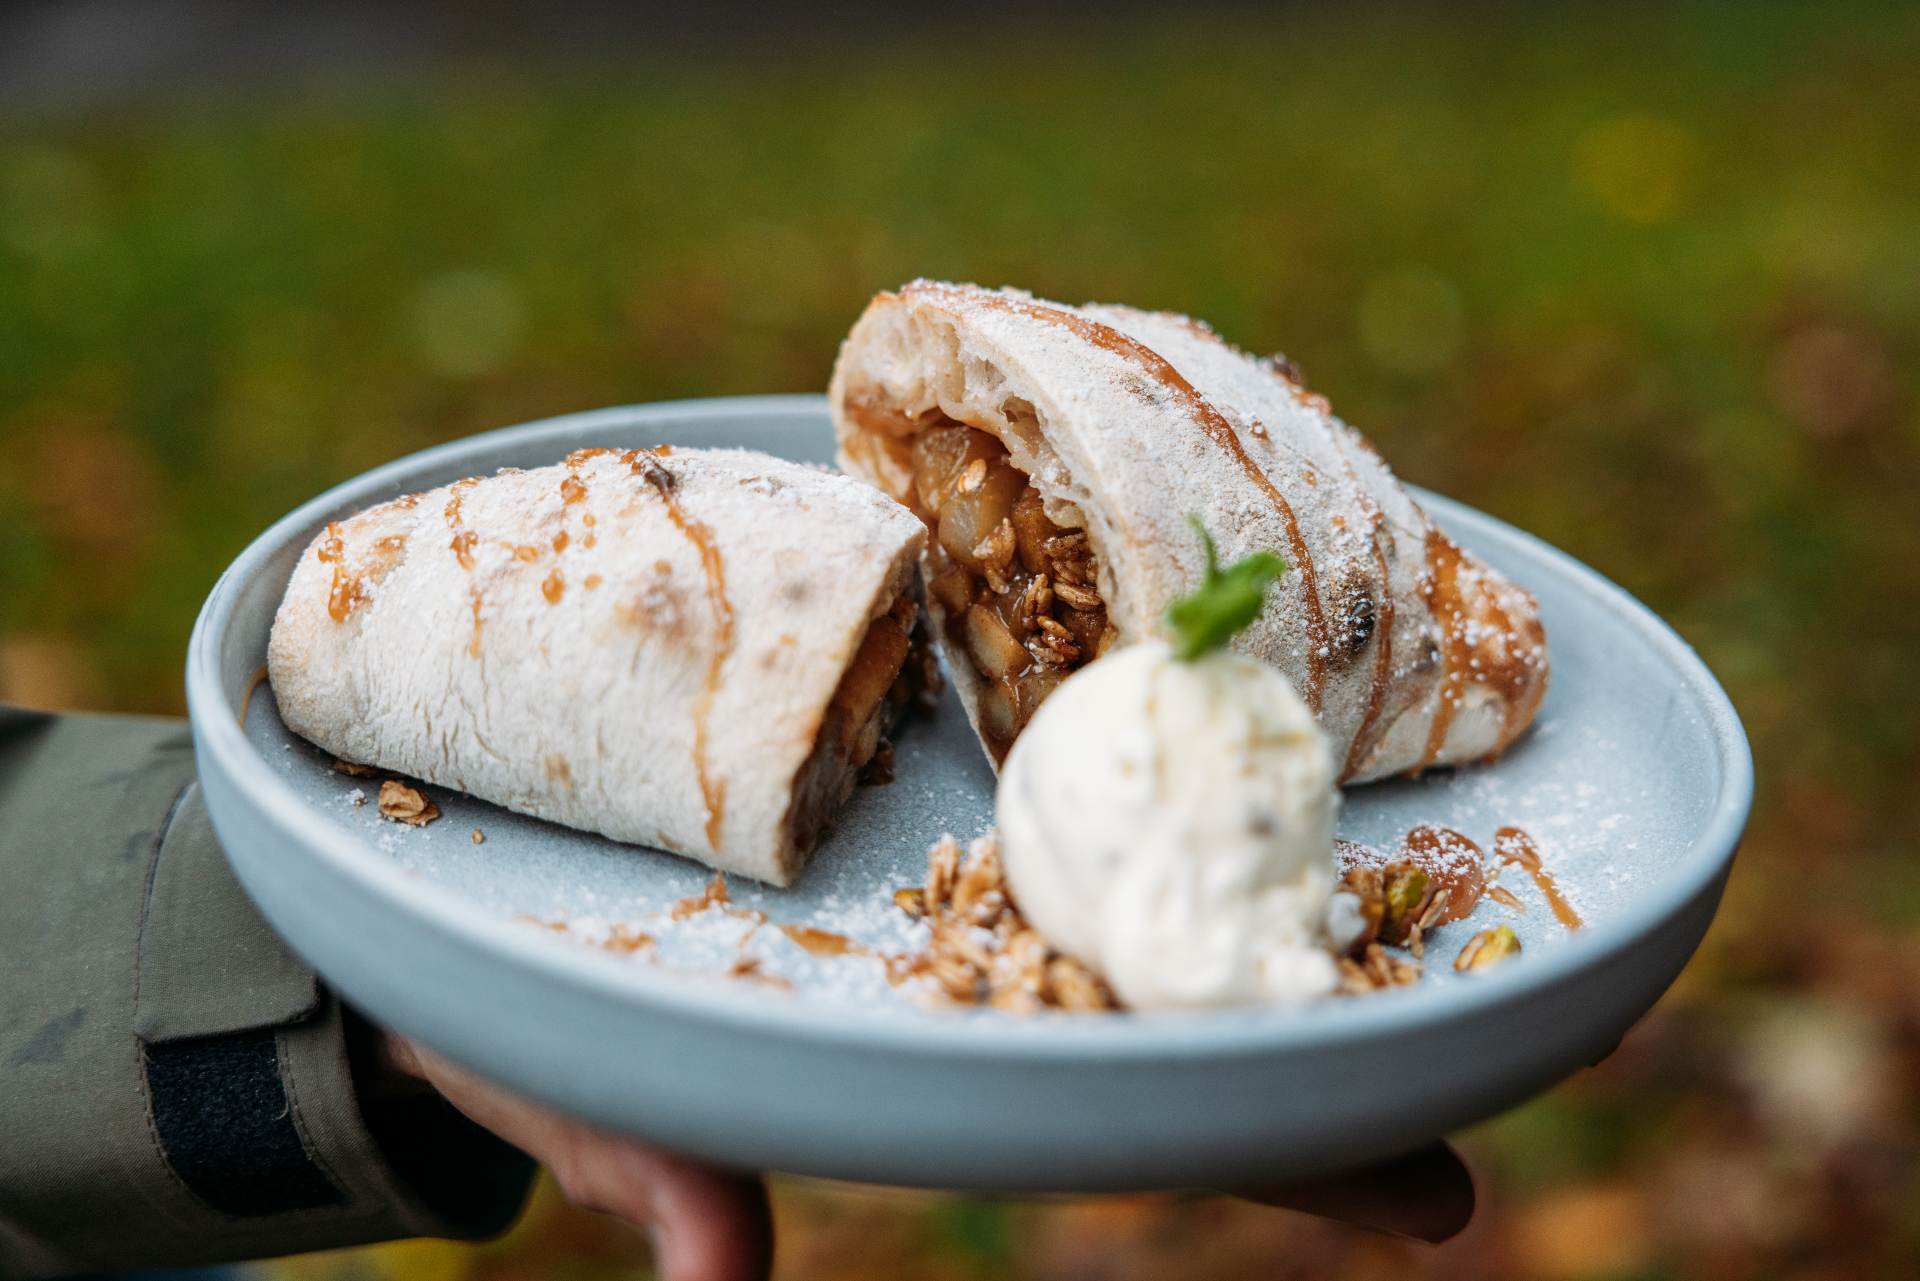 Apple and Pear Crumble Dessert Calzone